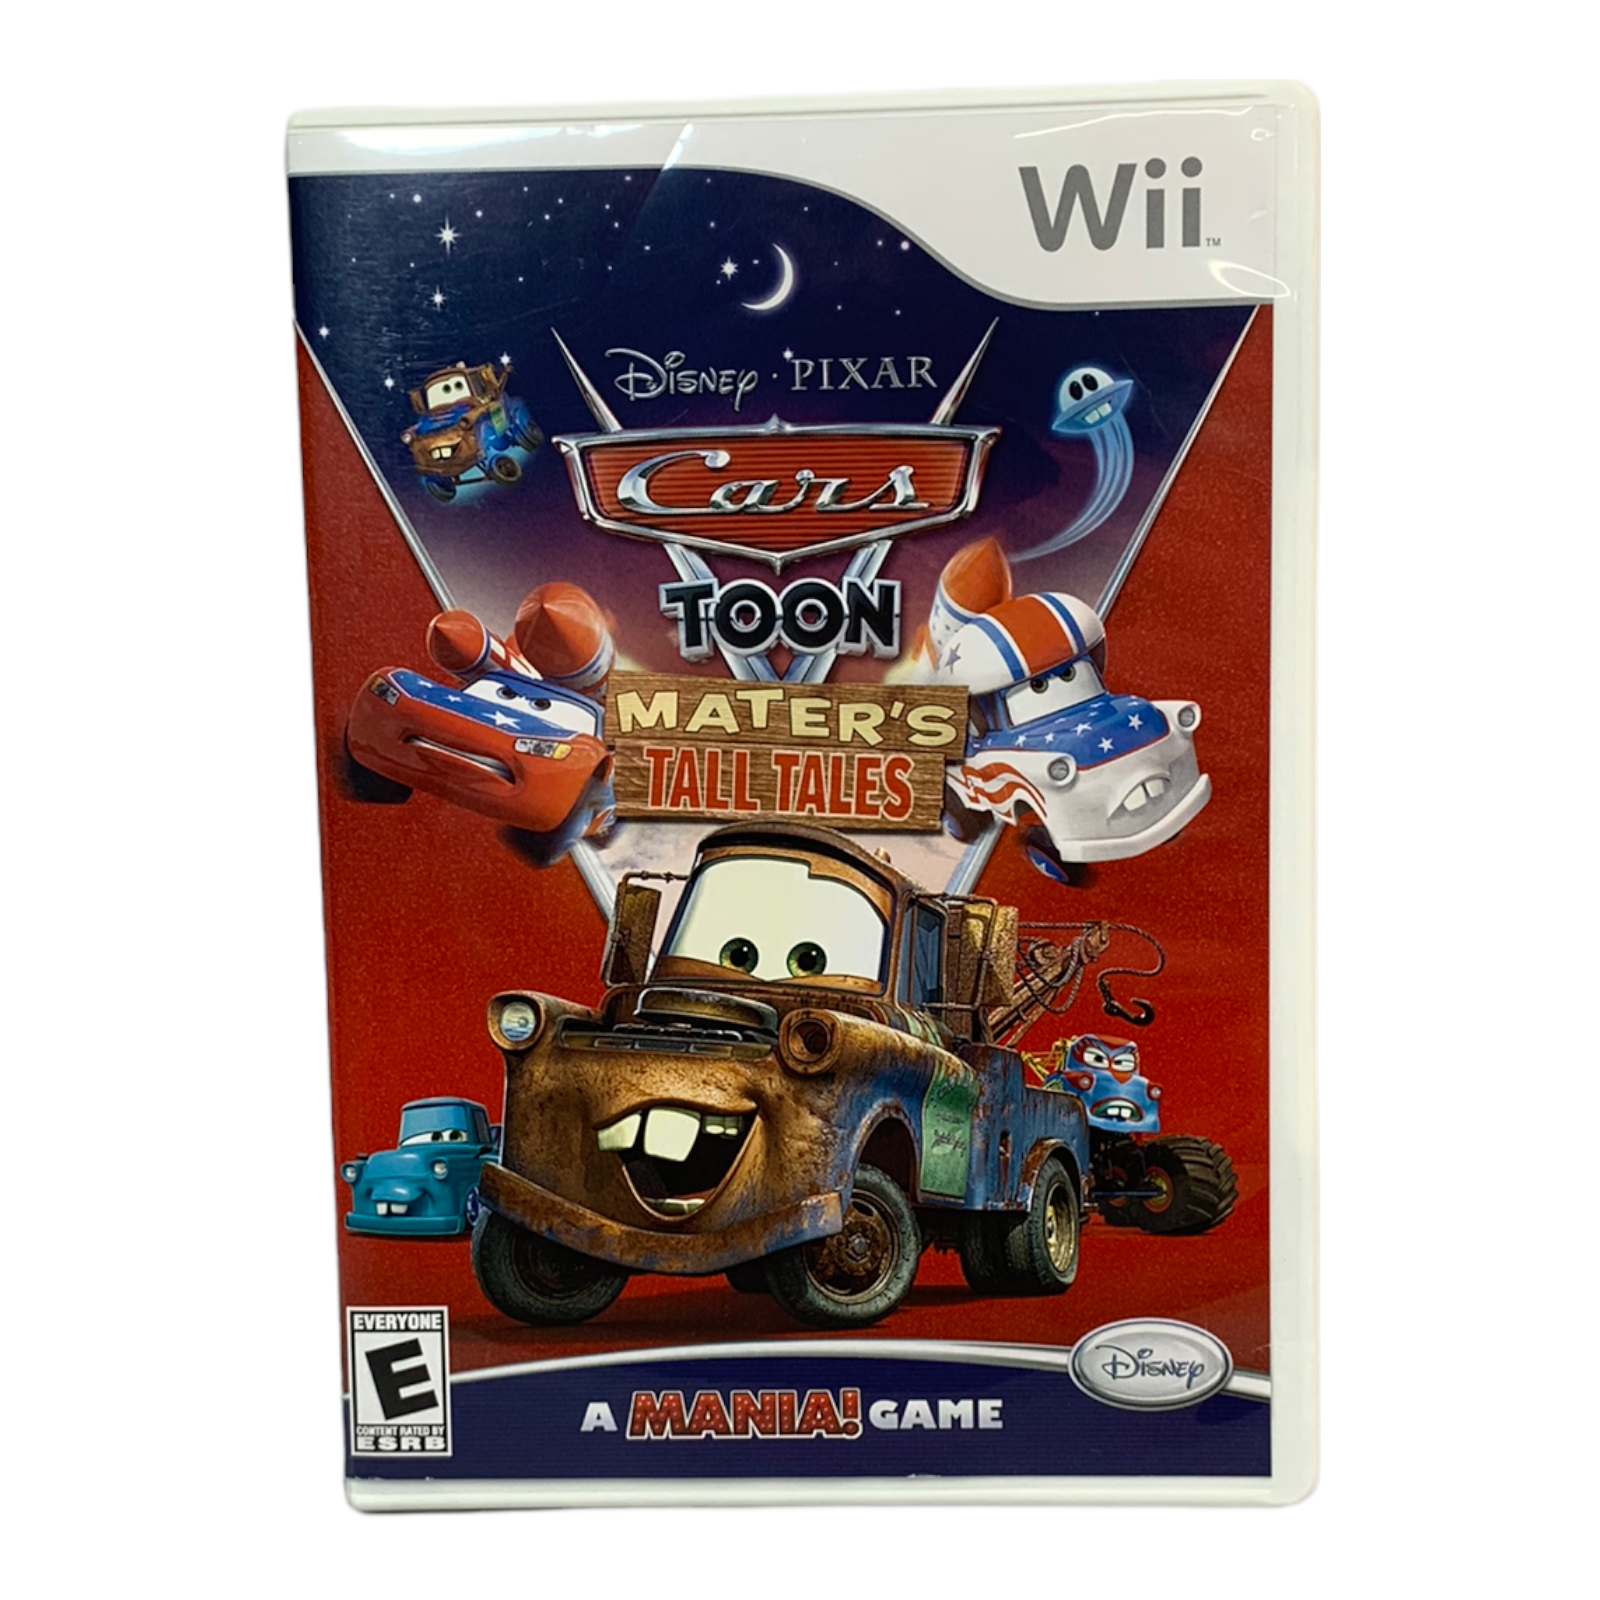 Primary image for Cars Toon: Mater's Tall Tales Nintendo Wii 2010 Disney Cars Complete with Manual